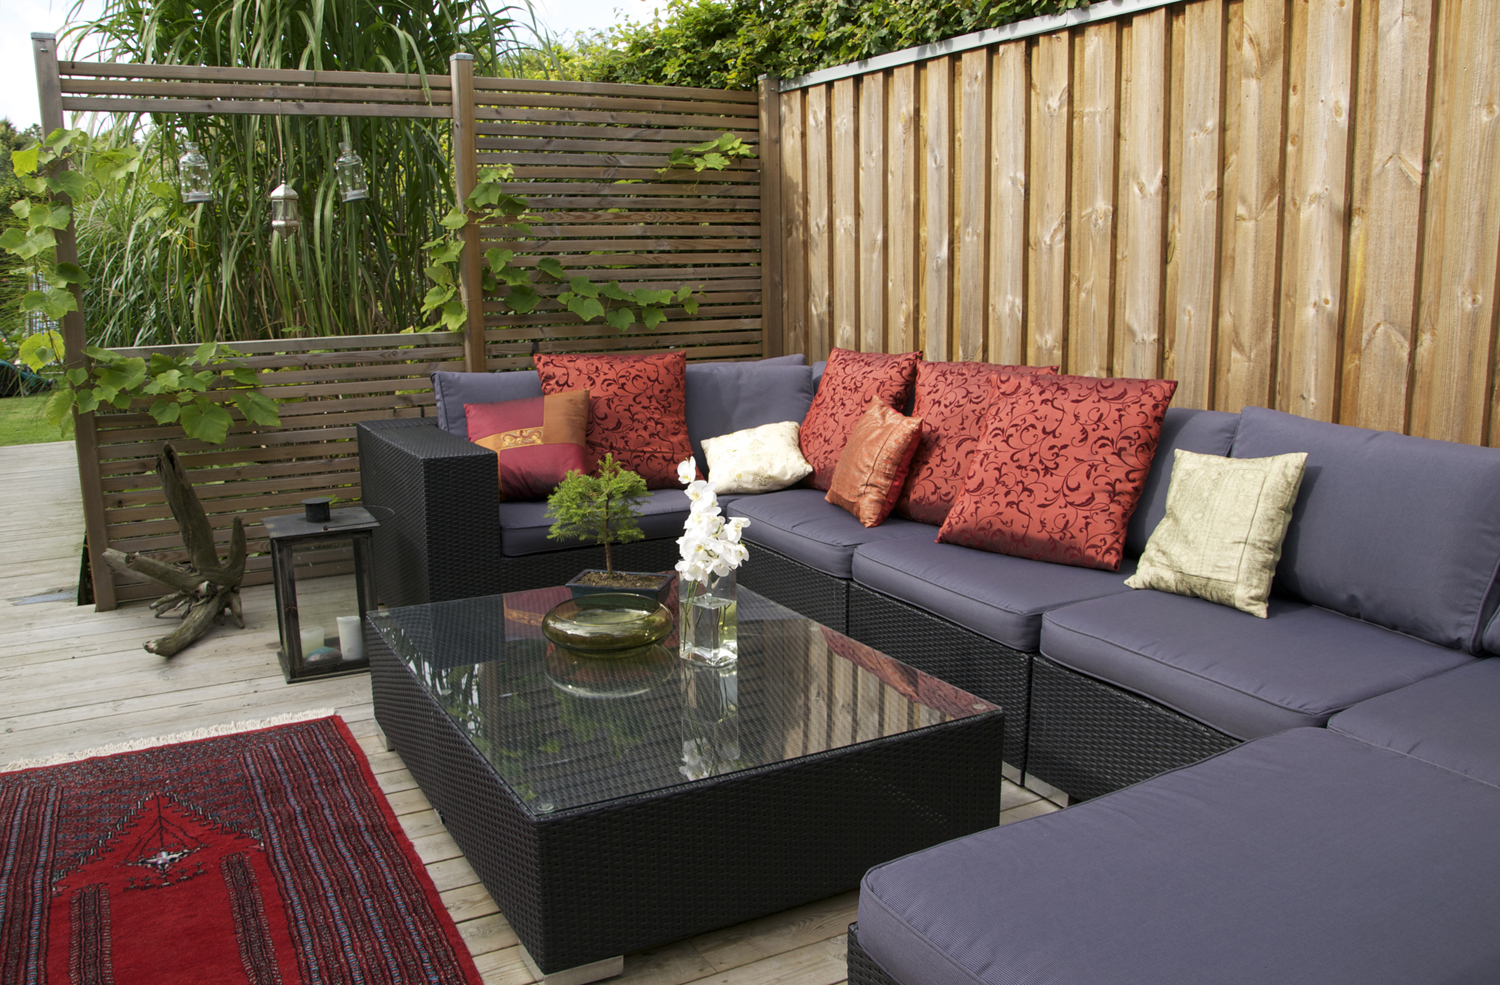 Outdoor living space with decorative fences